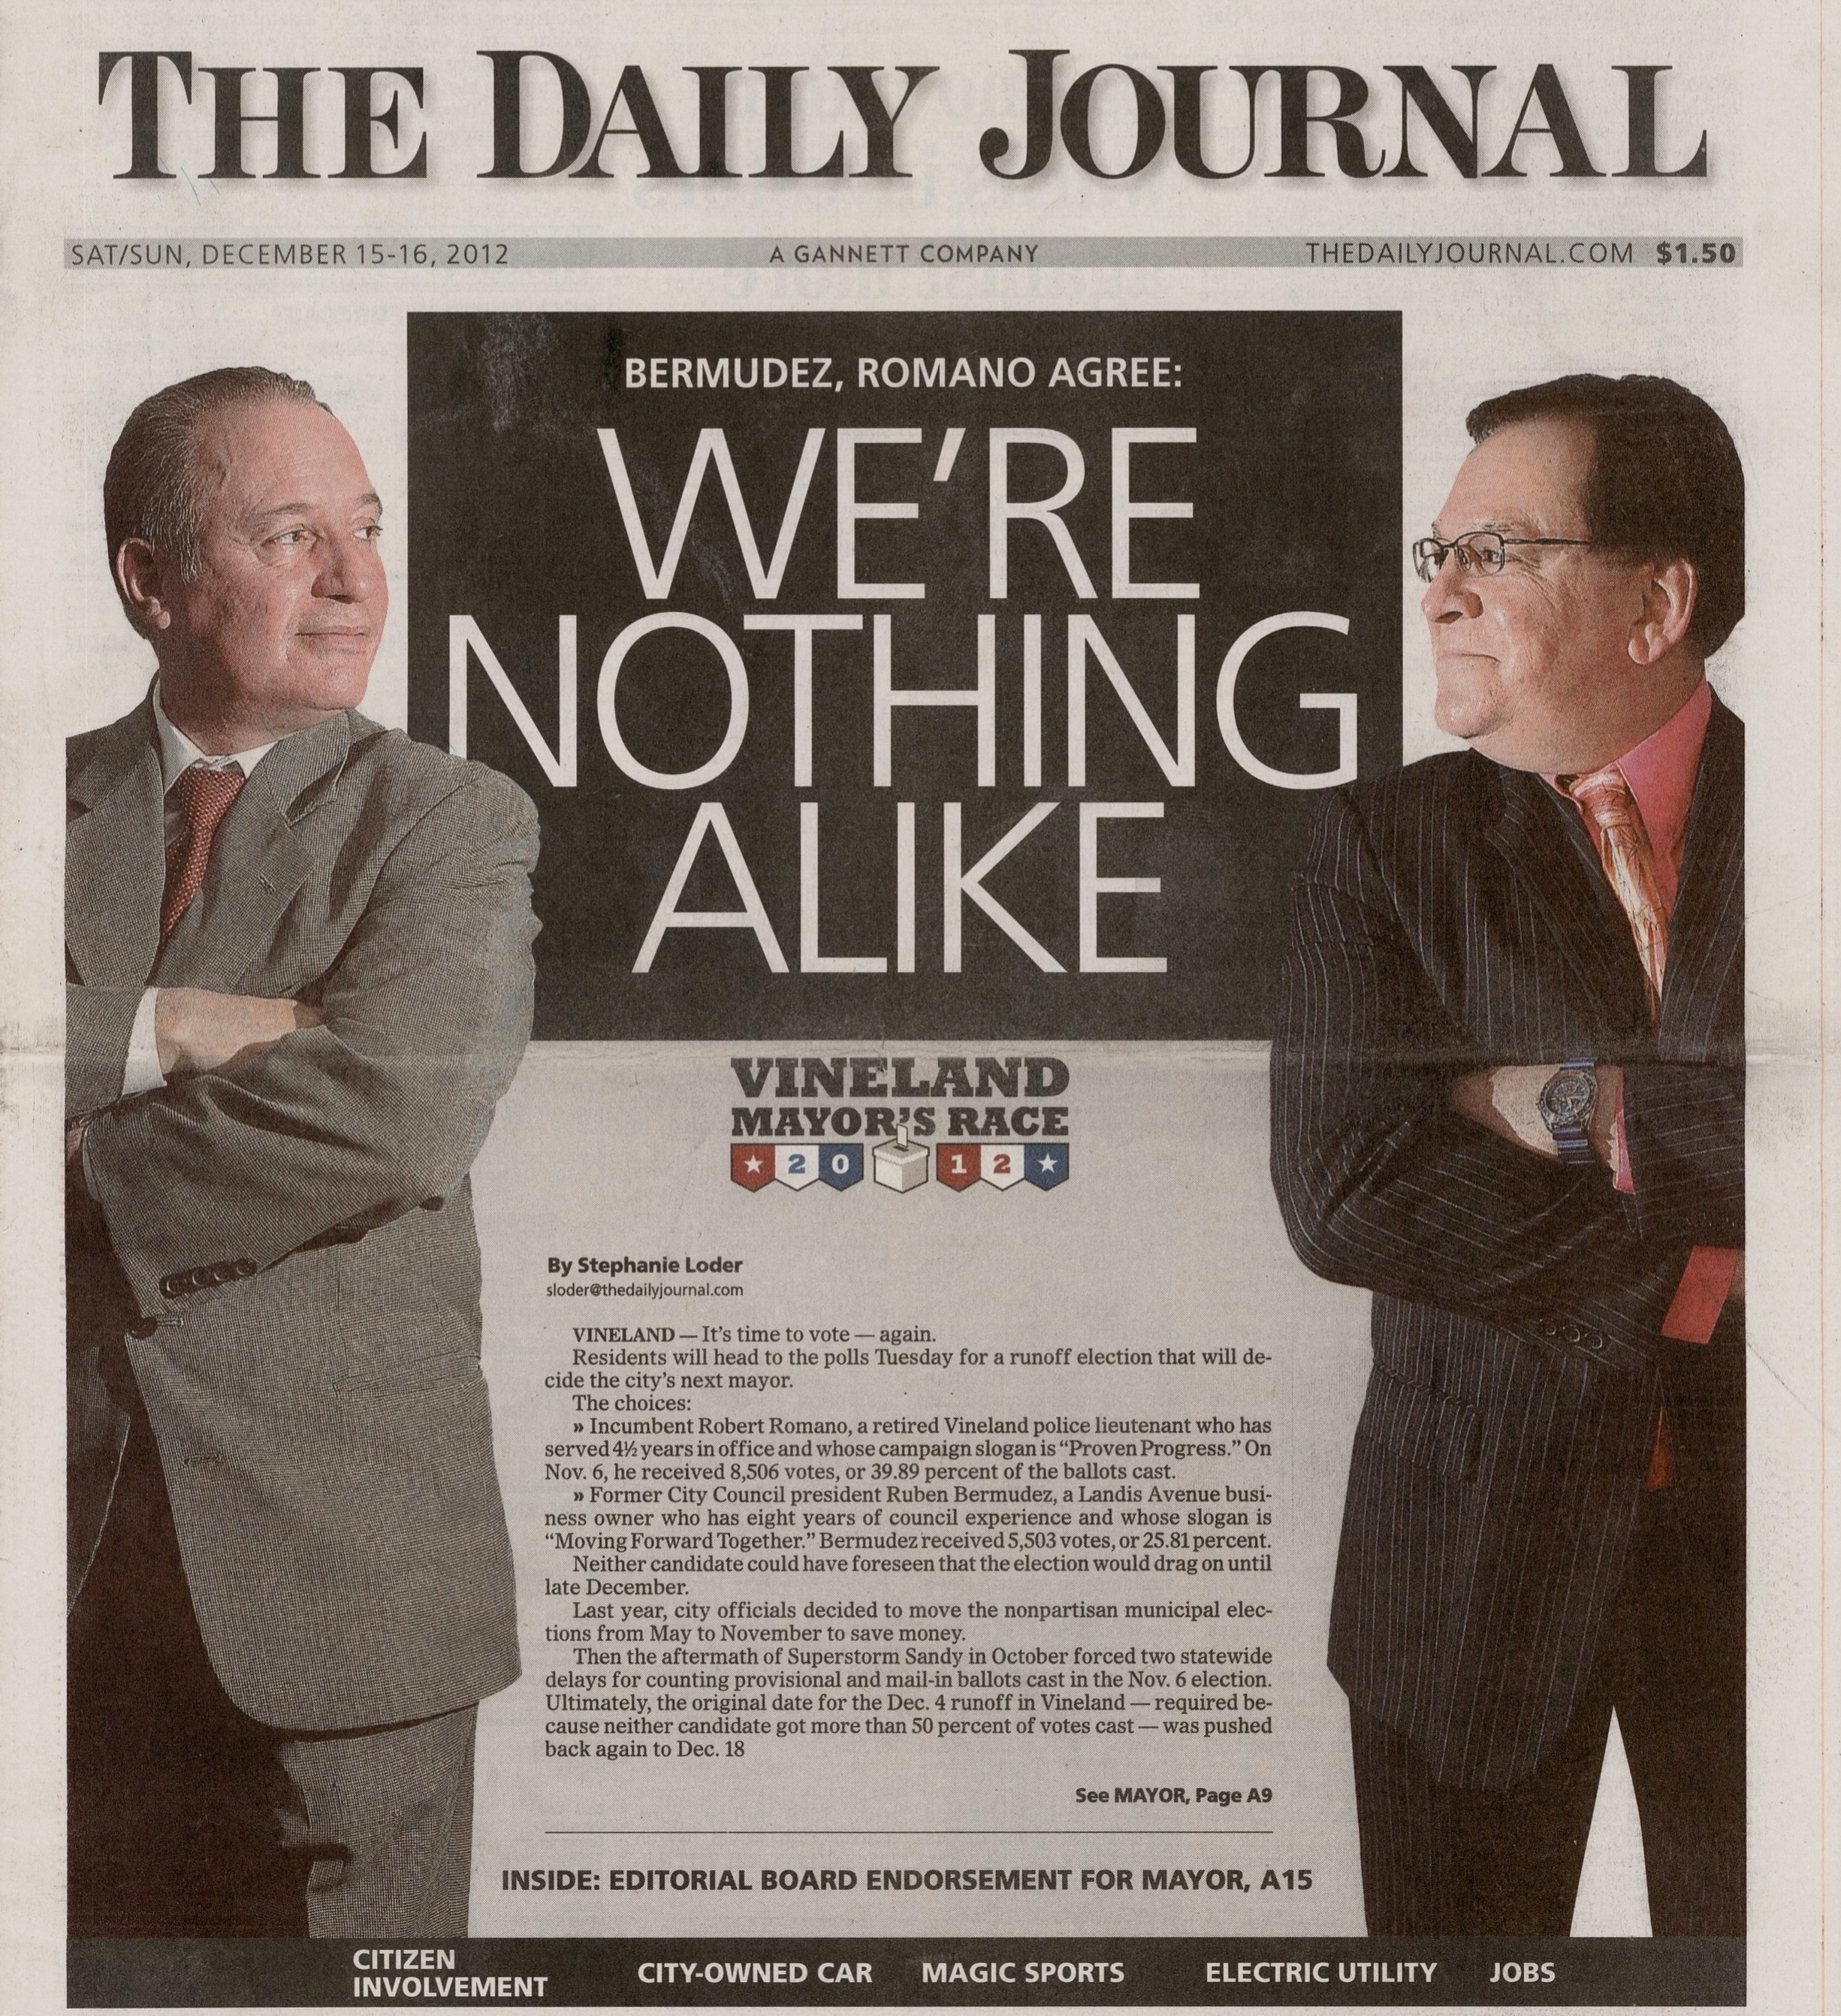  Vineland mayoral candidates Ruben Bermudez and Robert Romano are profiled December 15 2012 /  The Daily Journal  